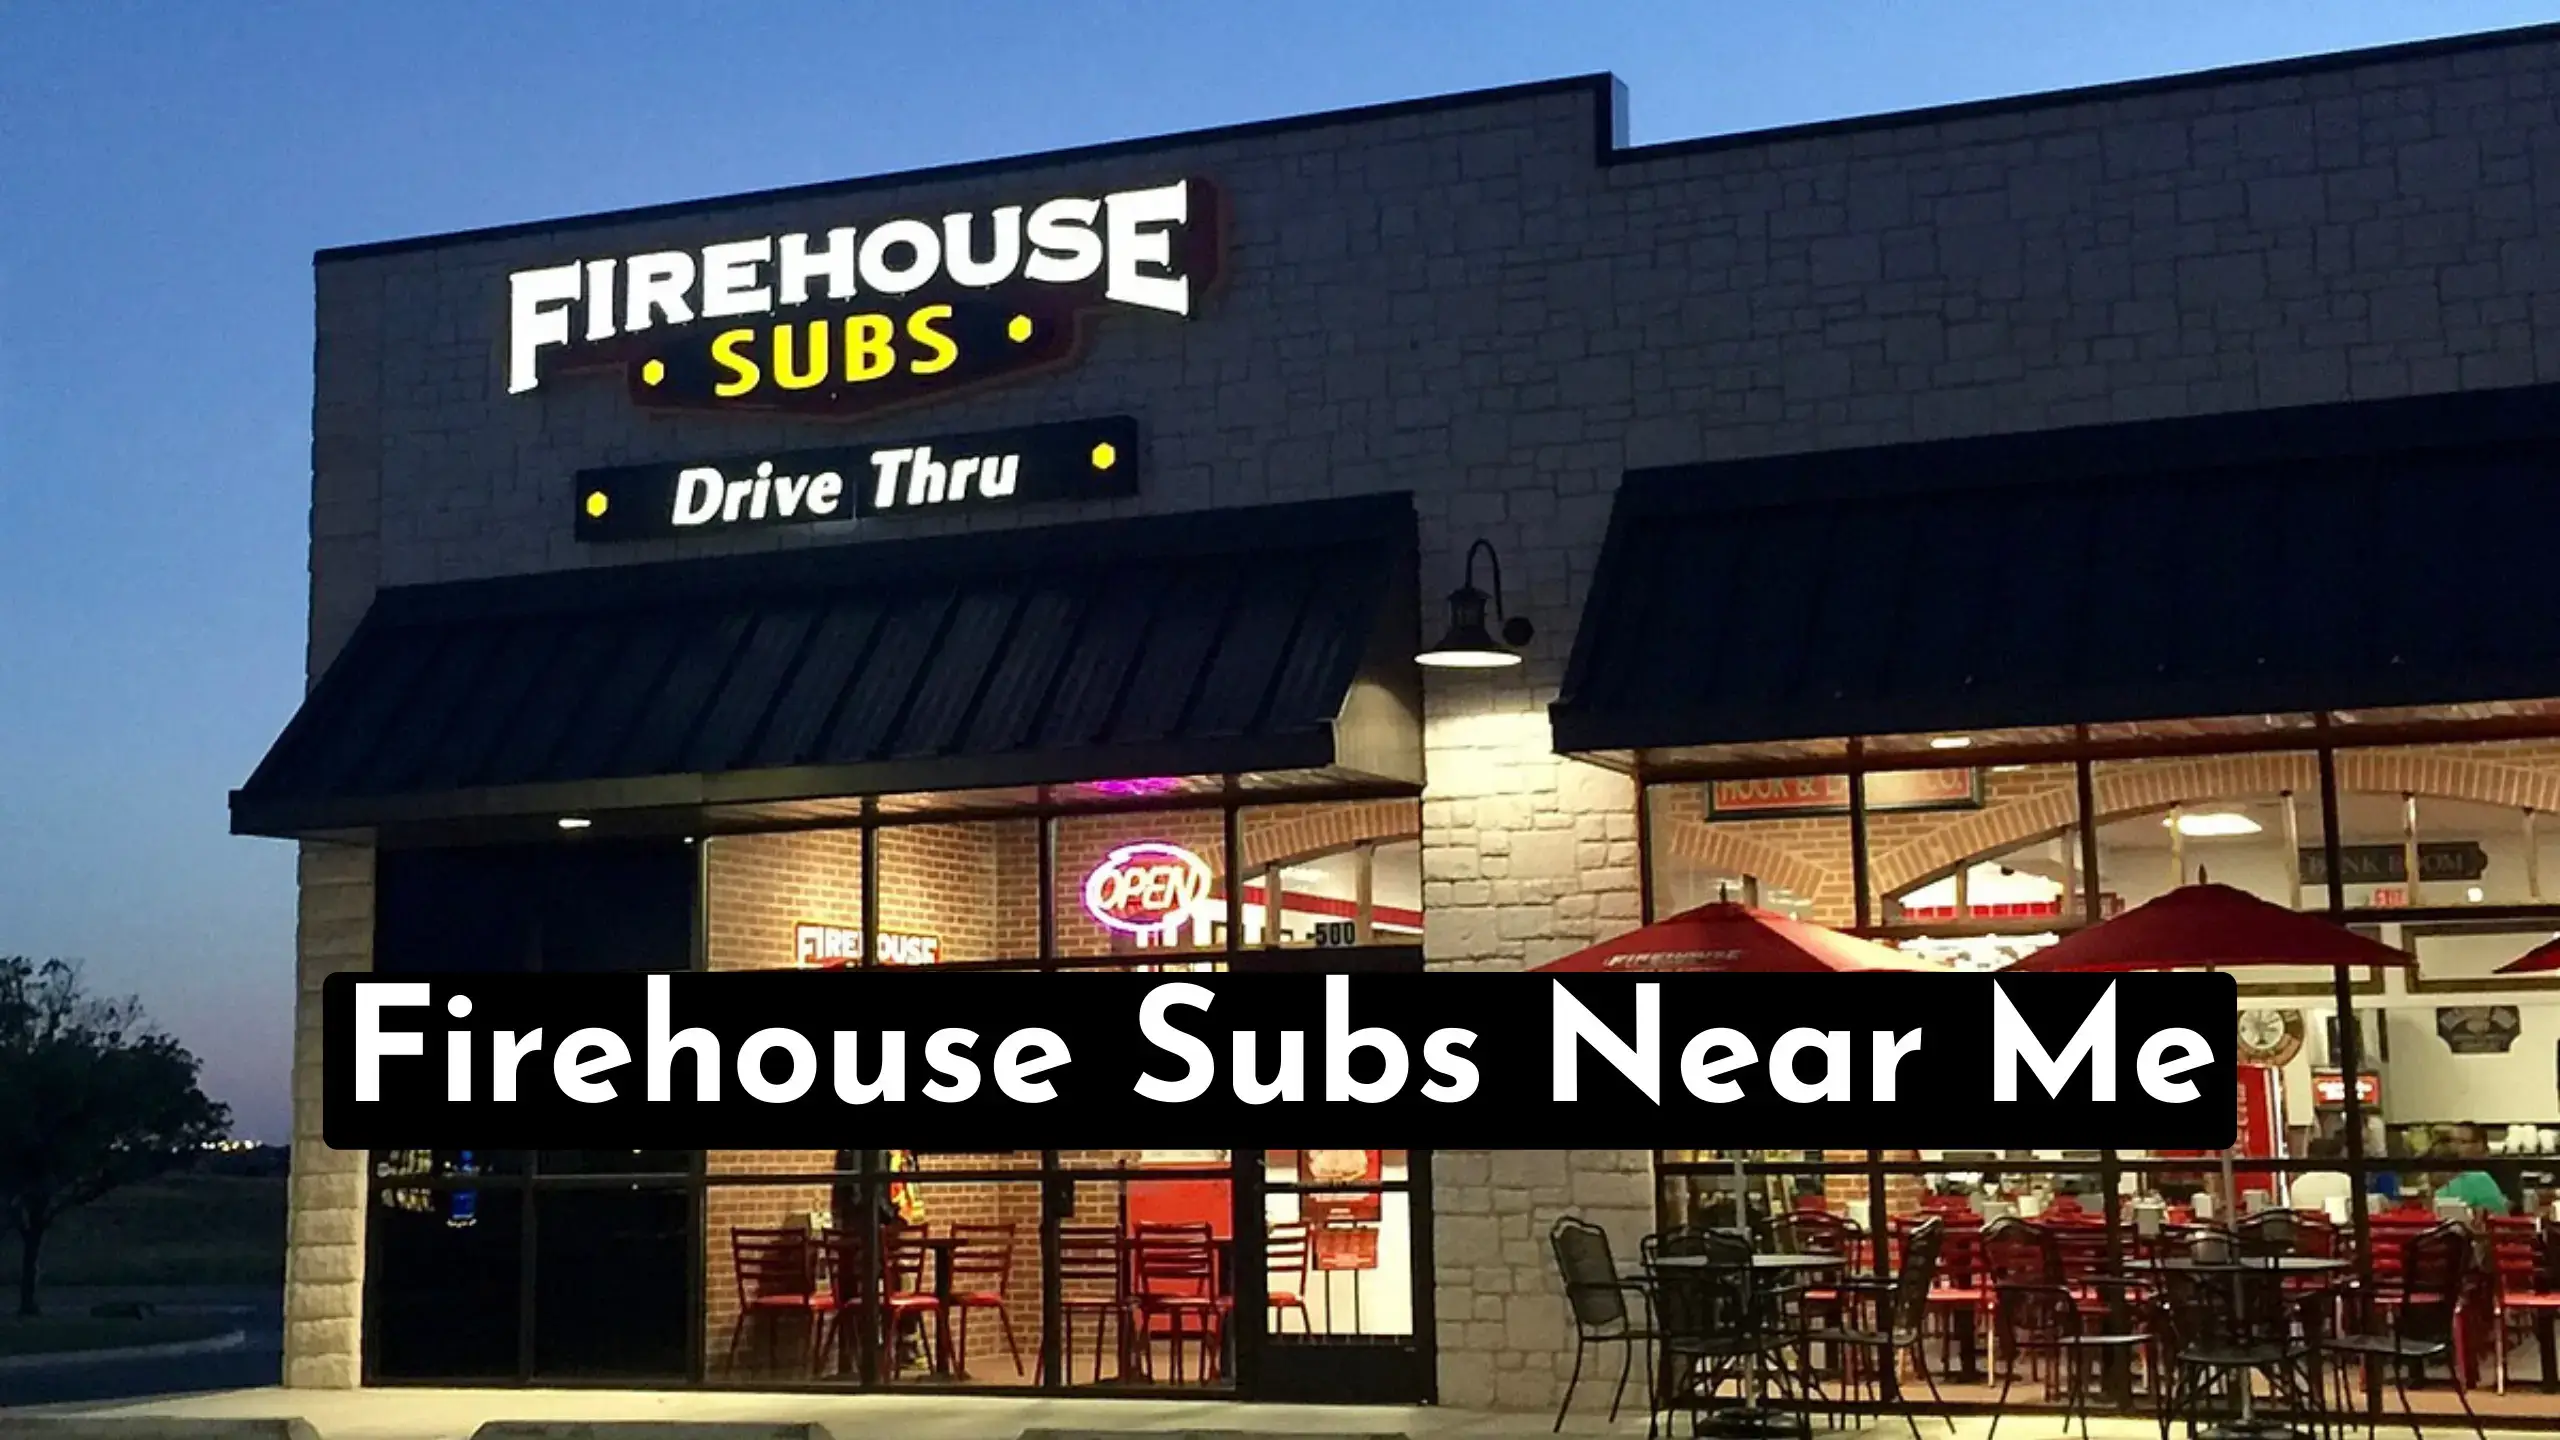 Are You Searching For Firehouse Subs Locations | Then Read This Ultimate Guide To Find Firehouse Subs Near Me, Firehouse Subs Menu & Firehouse Subs Hours.